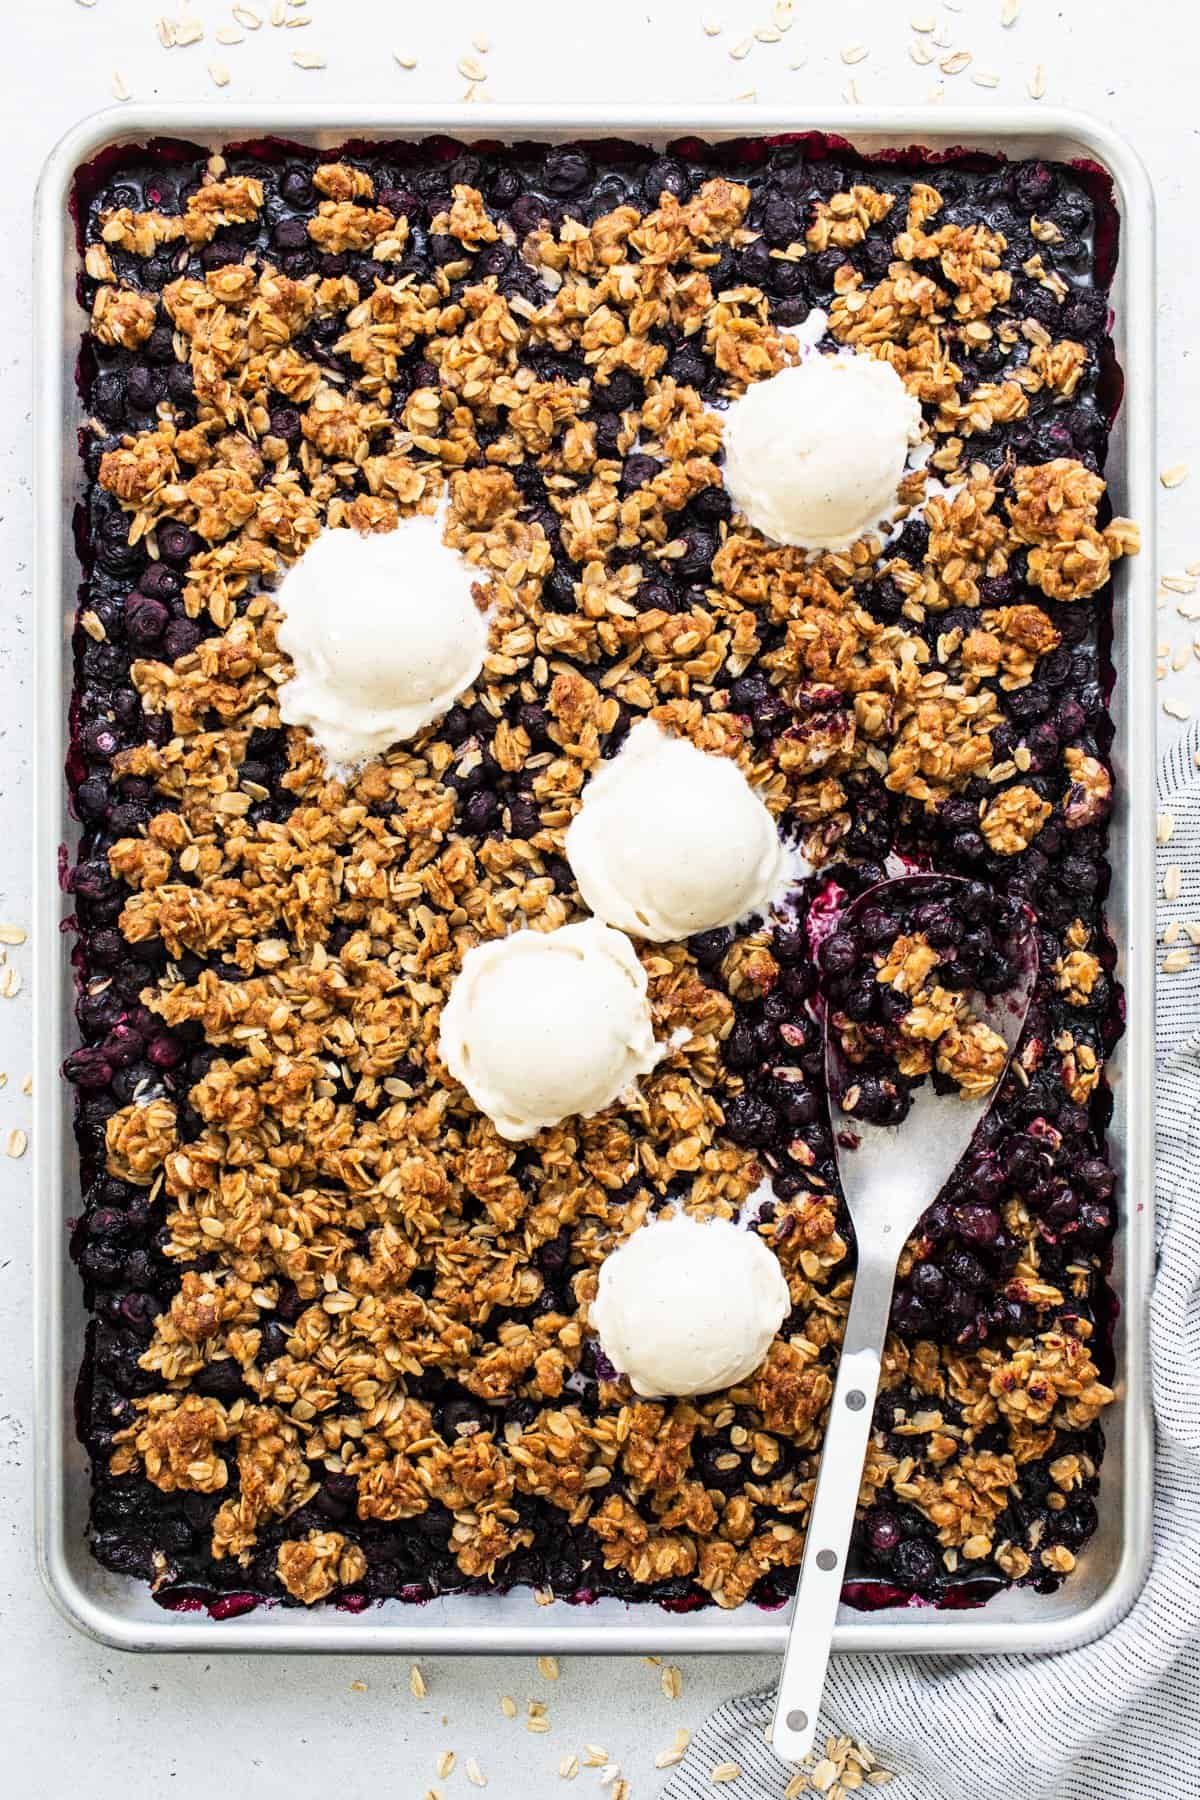 Freshly baked blueberry crumble with scoops of vanilla ice cream on top.